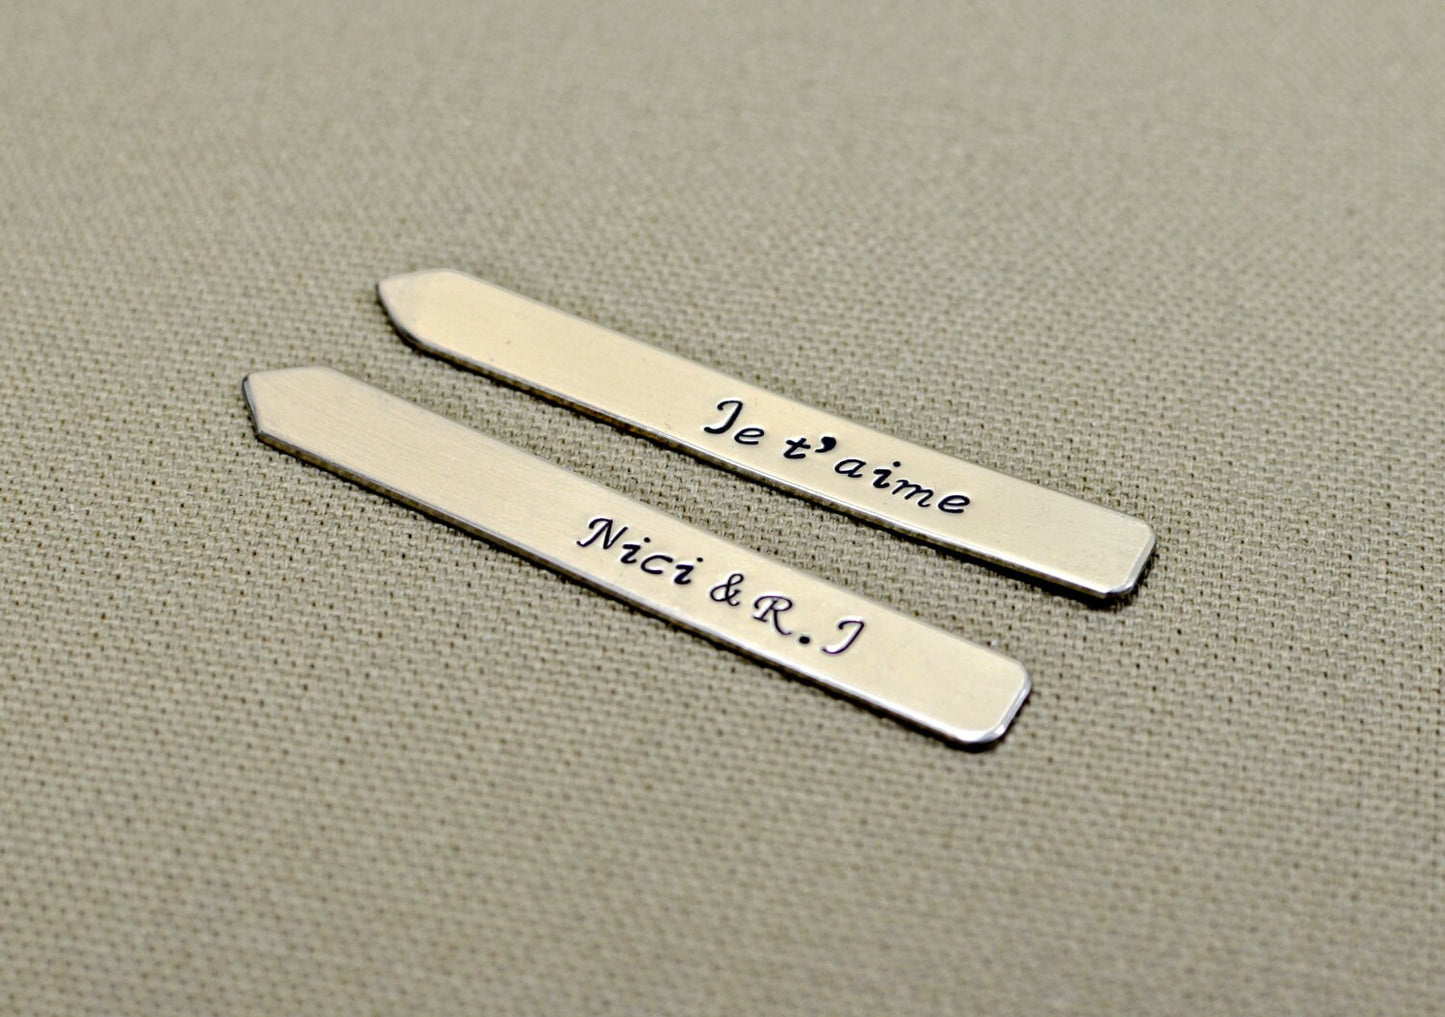 Je'Taime Sterling Silver Collar Stays in French